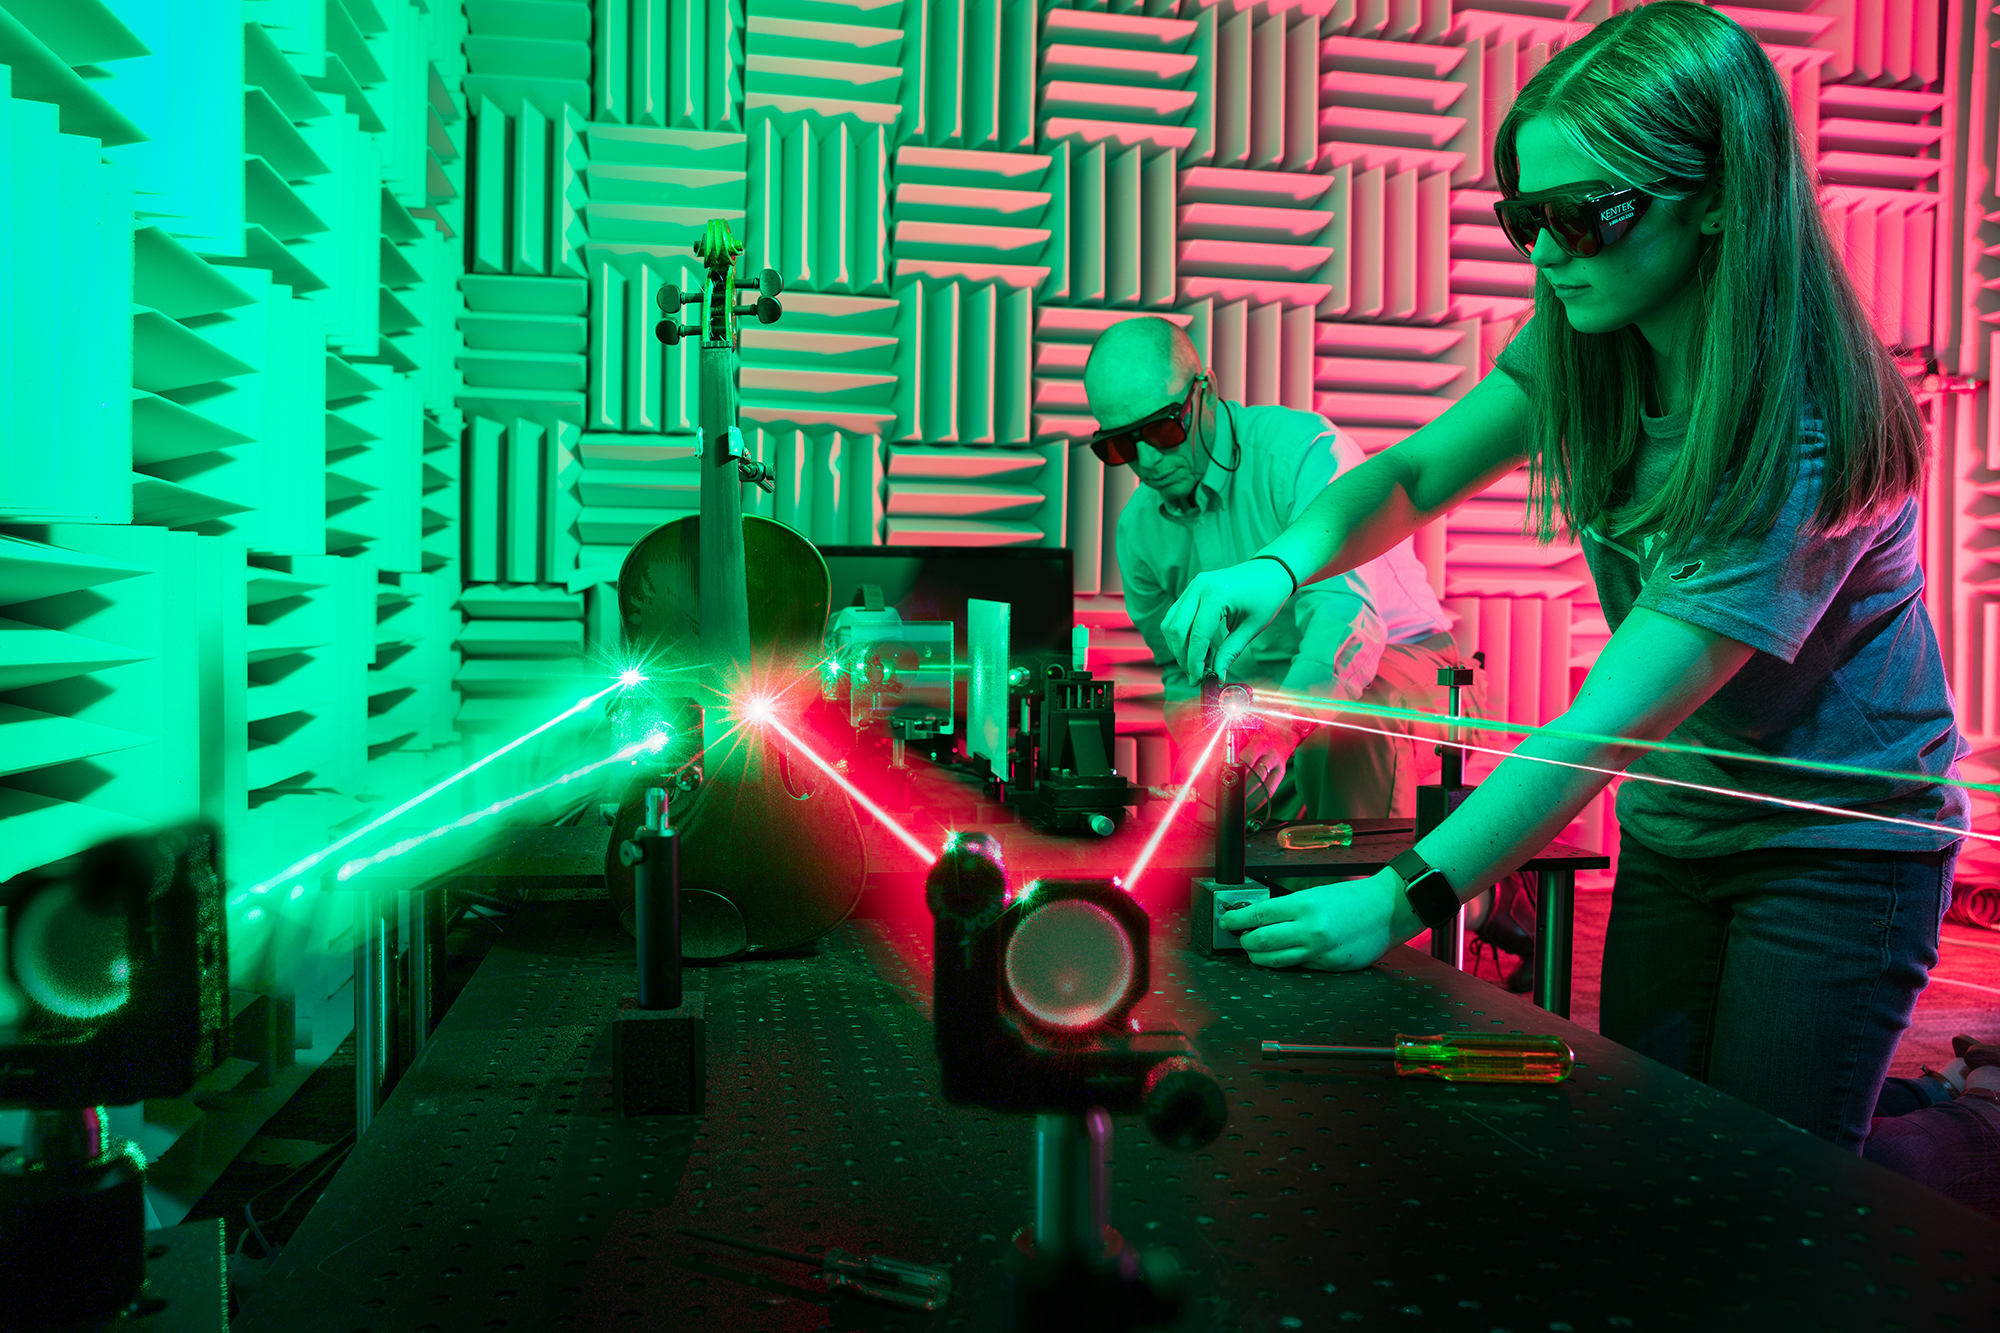 Studying musical acoustics using lasers in physics professor Thomas Moore’s anechoic chamber lab.